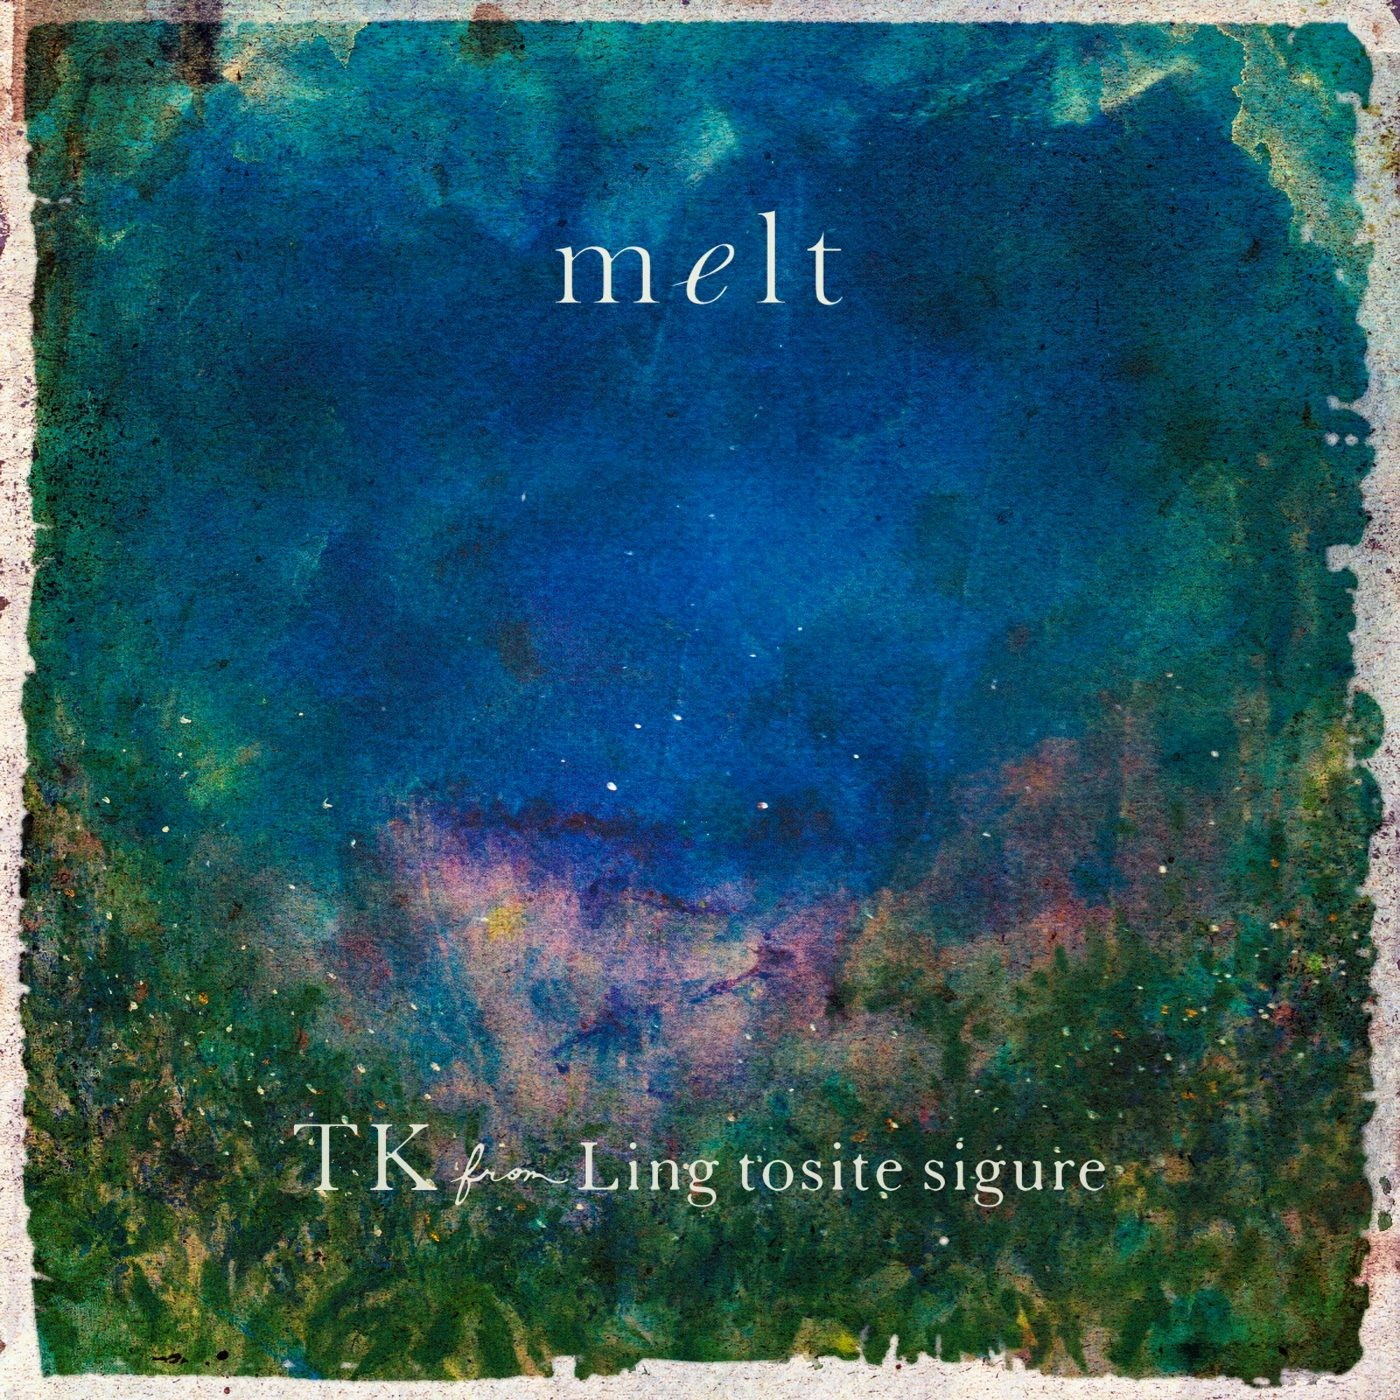 TK from 凛として時雨 (TK from Ling tosite sigure) – melt (with suis from ヨルシカ) [FLAC 24bit/48kHz]